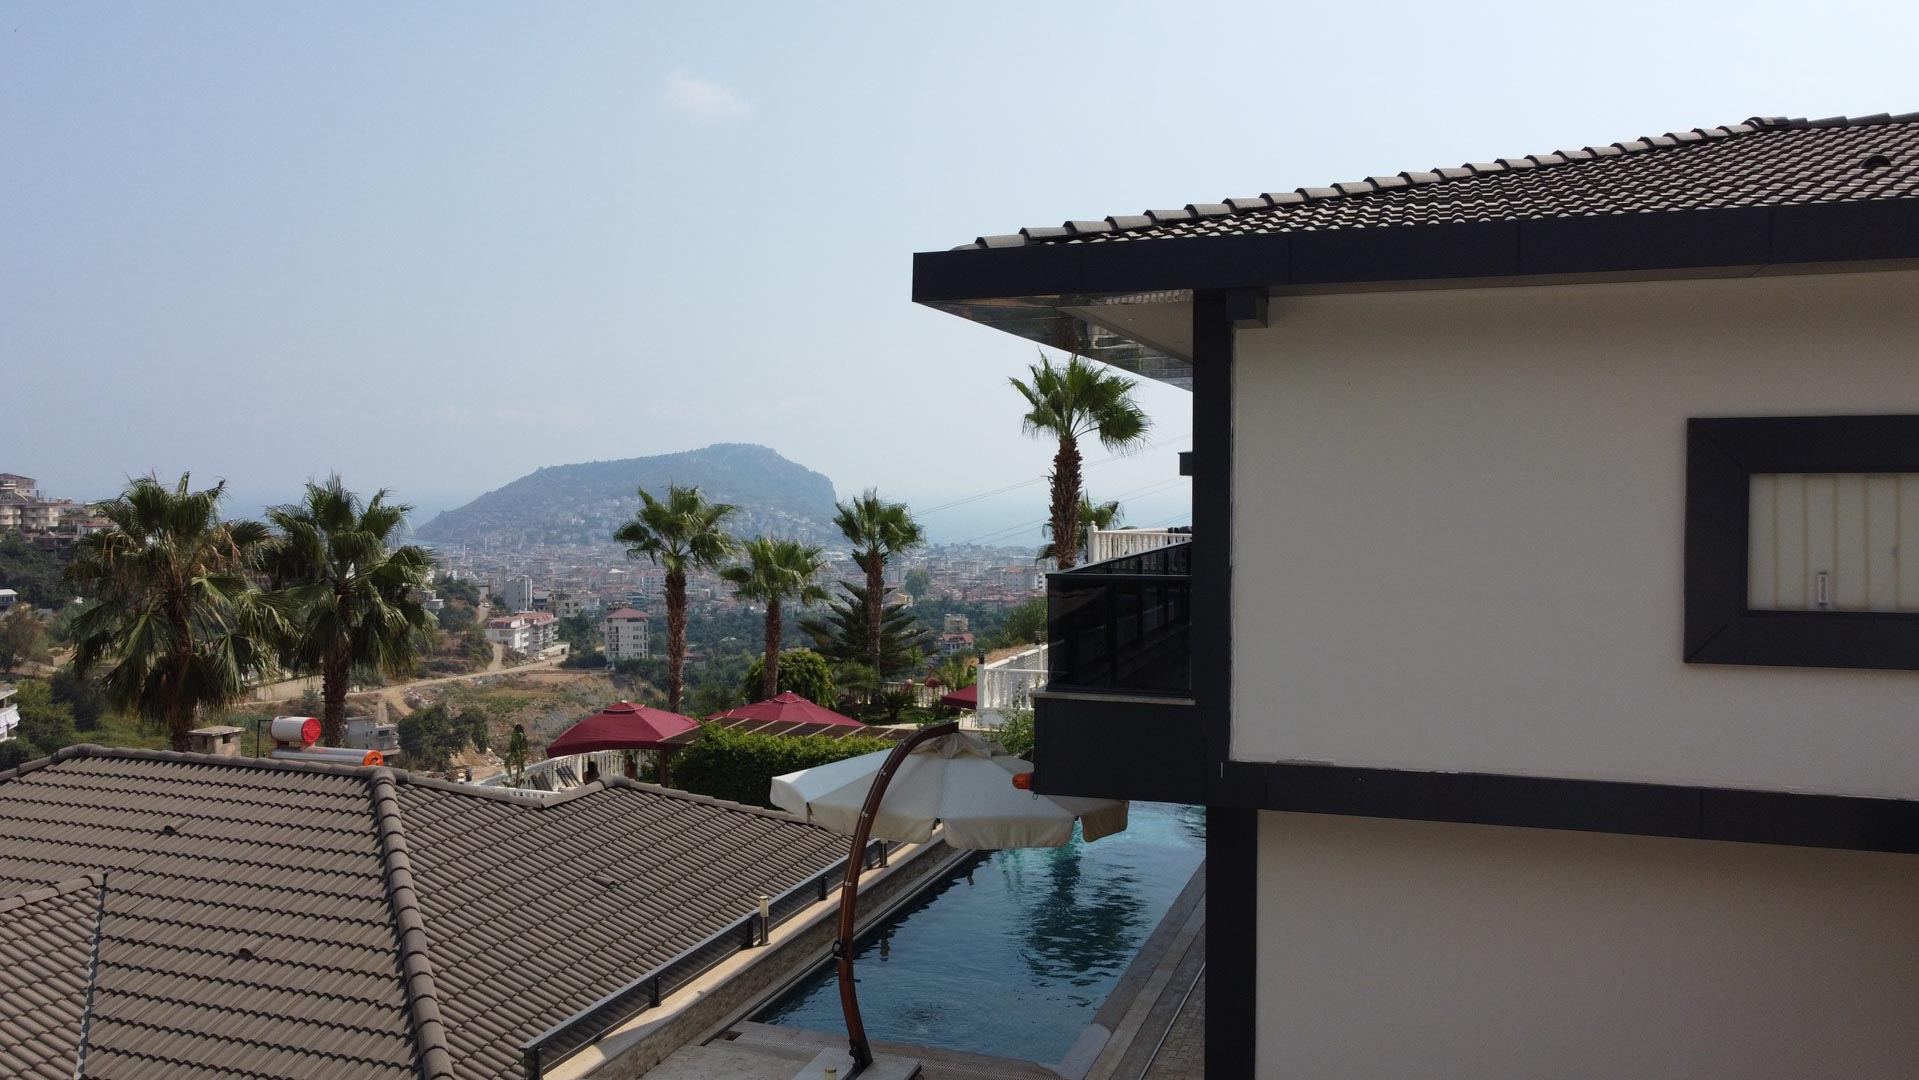 id1033-villa-11-with-vip-infrastructure-and-a-view-of-the-alanya-fortress-24.jpg